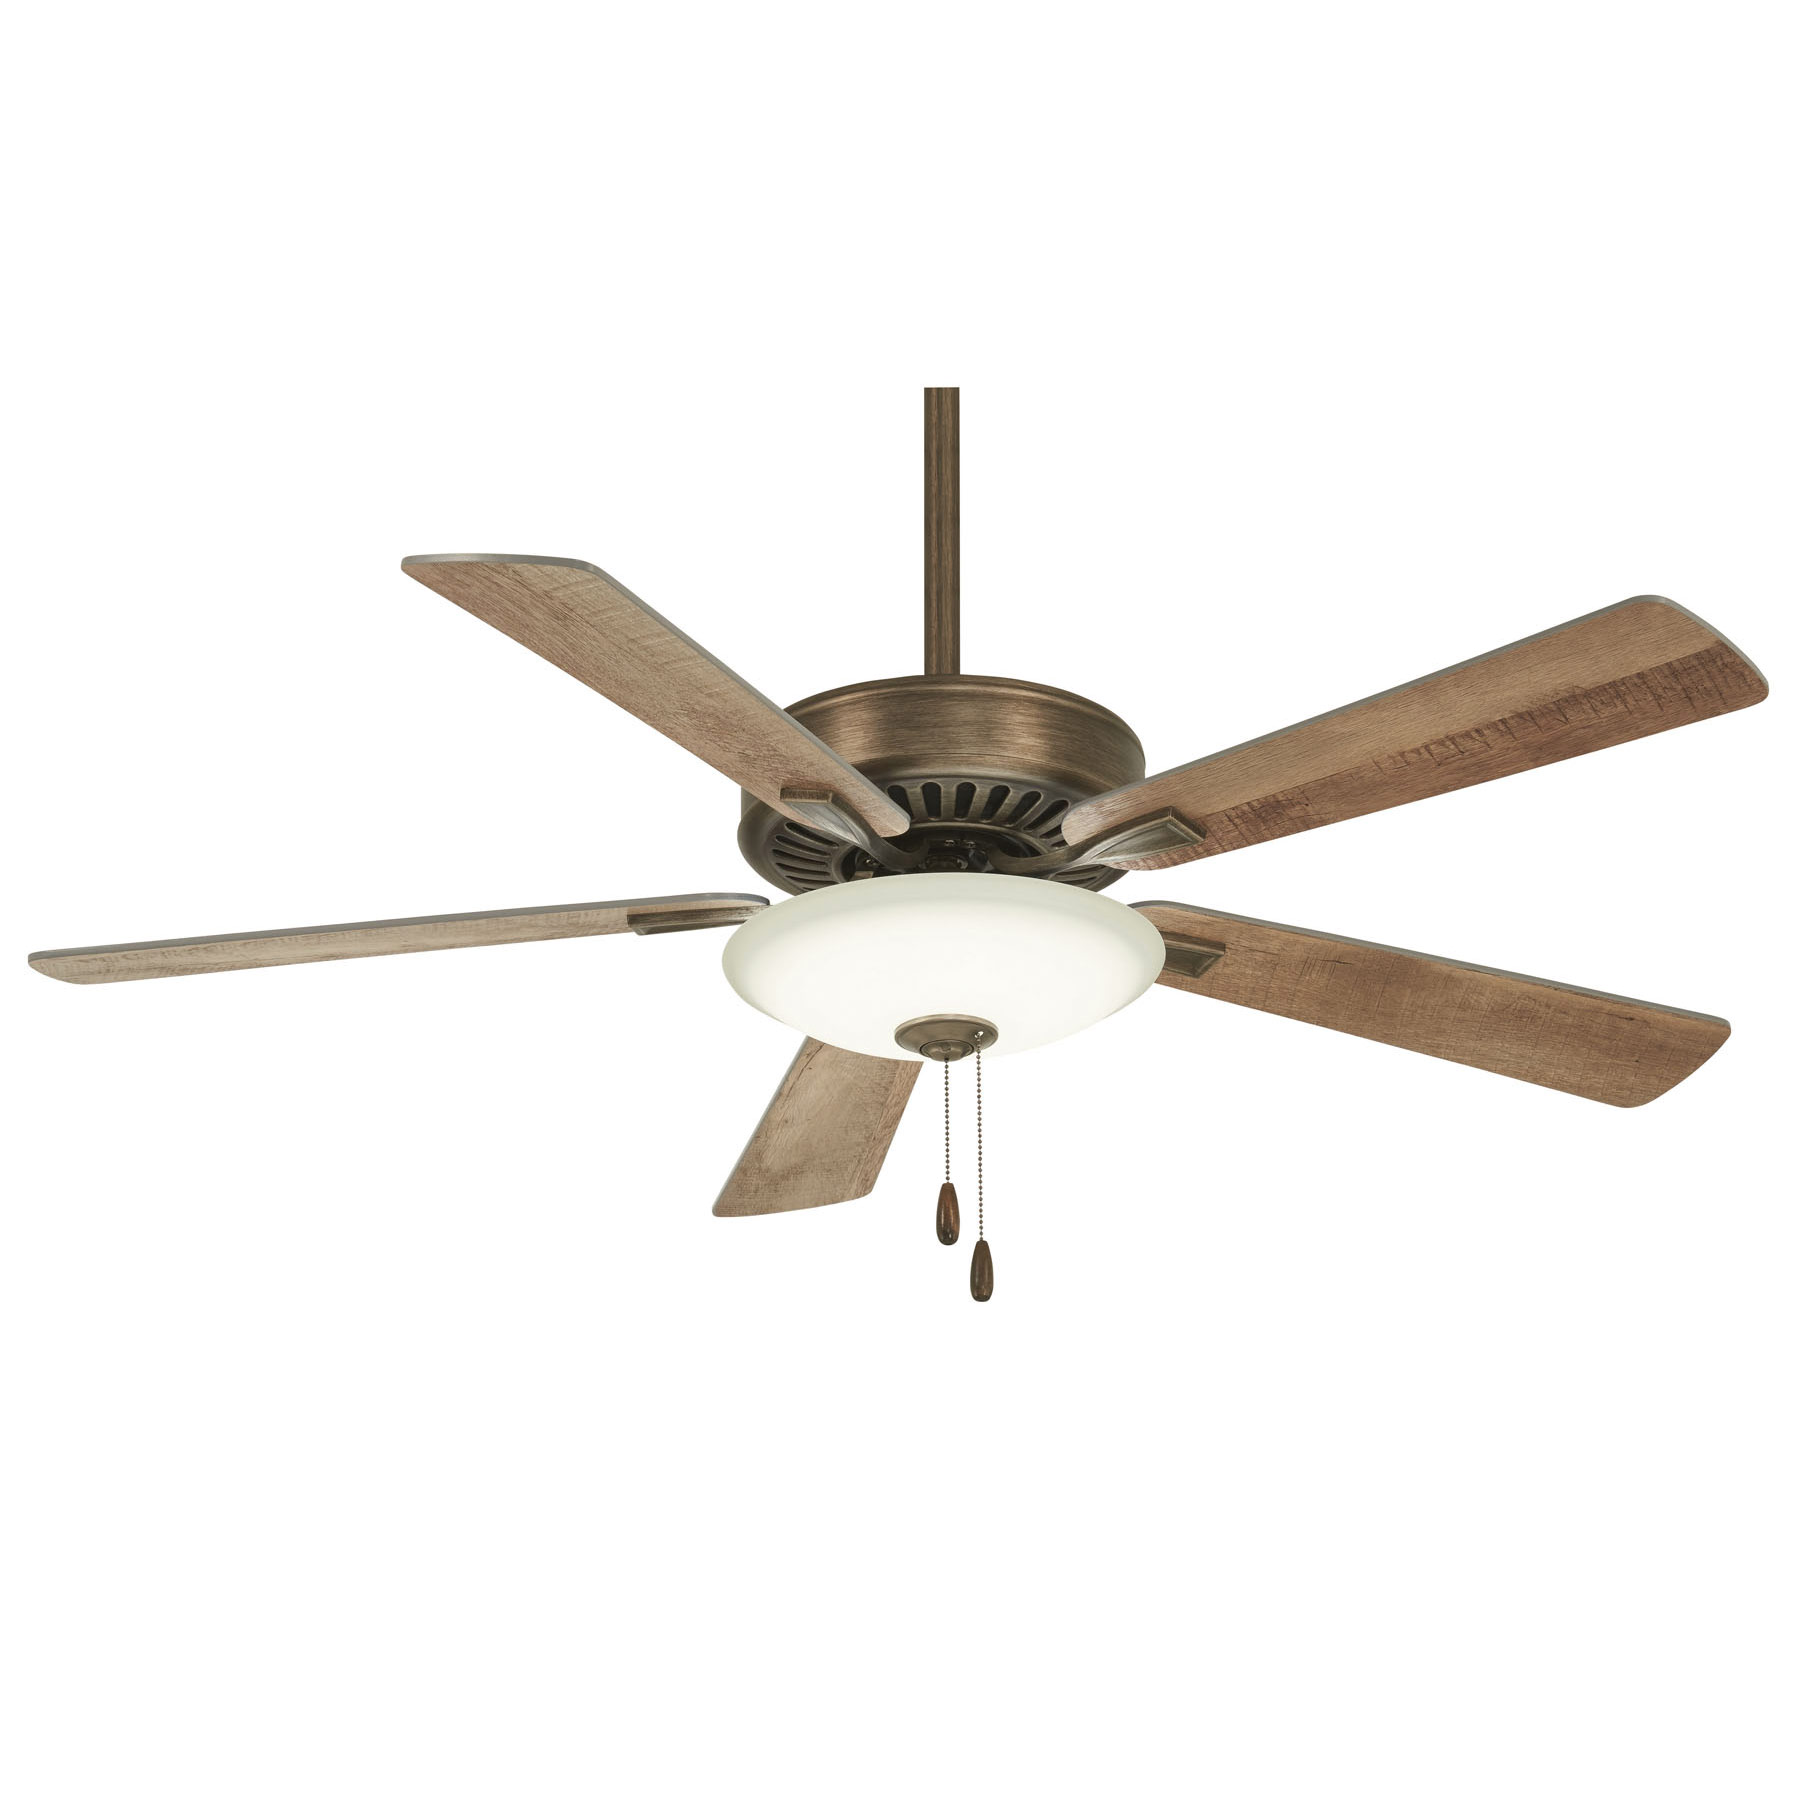 Contractor Uni-Pack Ceiling Fan with Light by Minka Aire F656L-HBZ  MKA881226